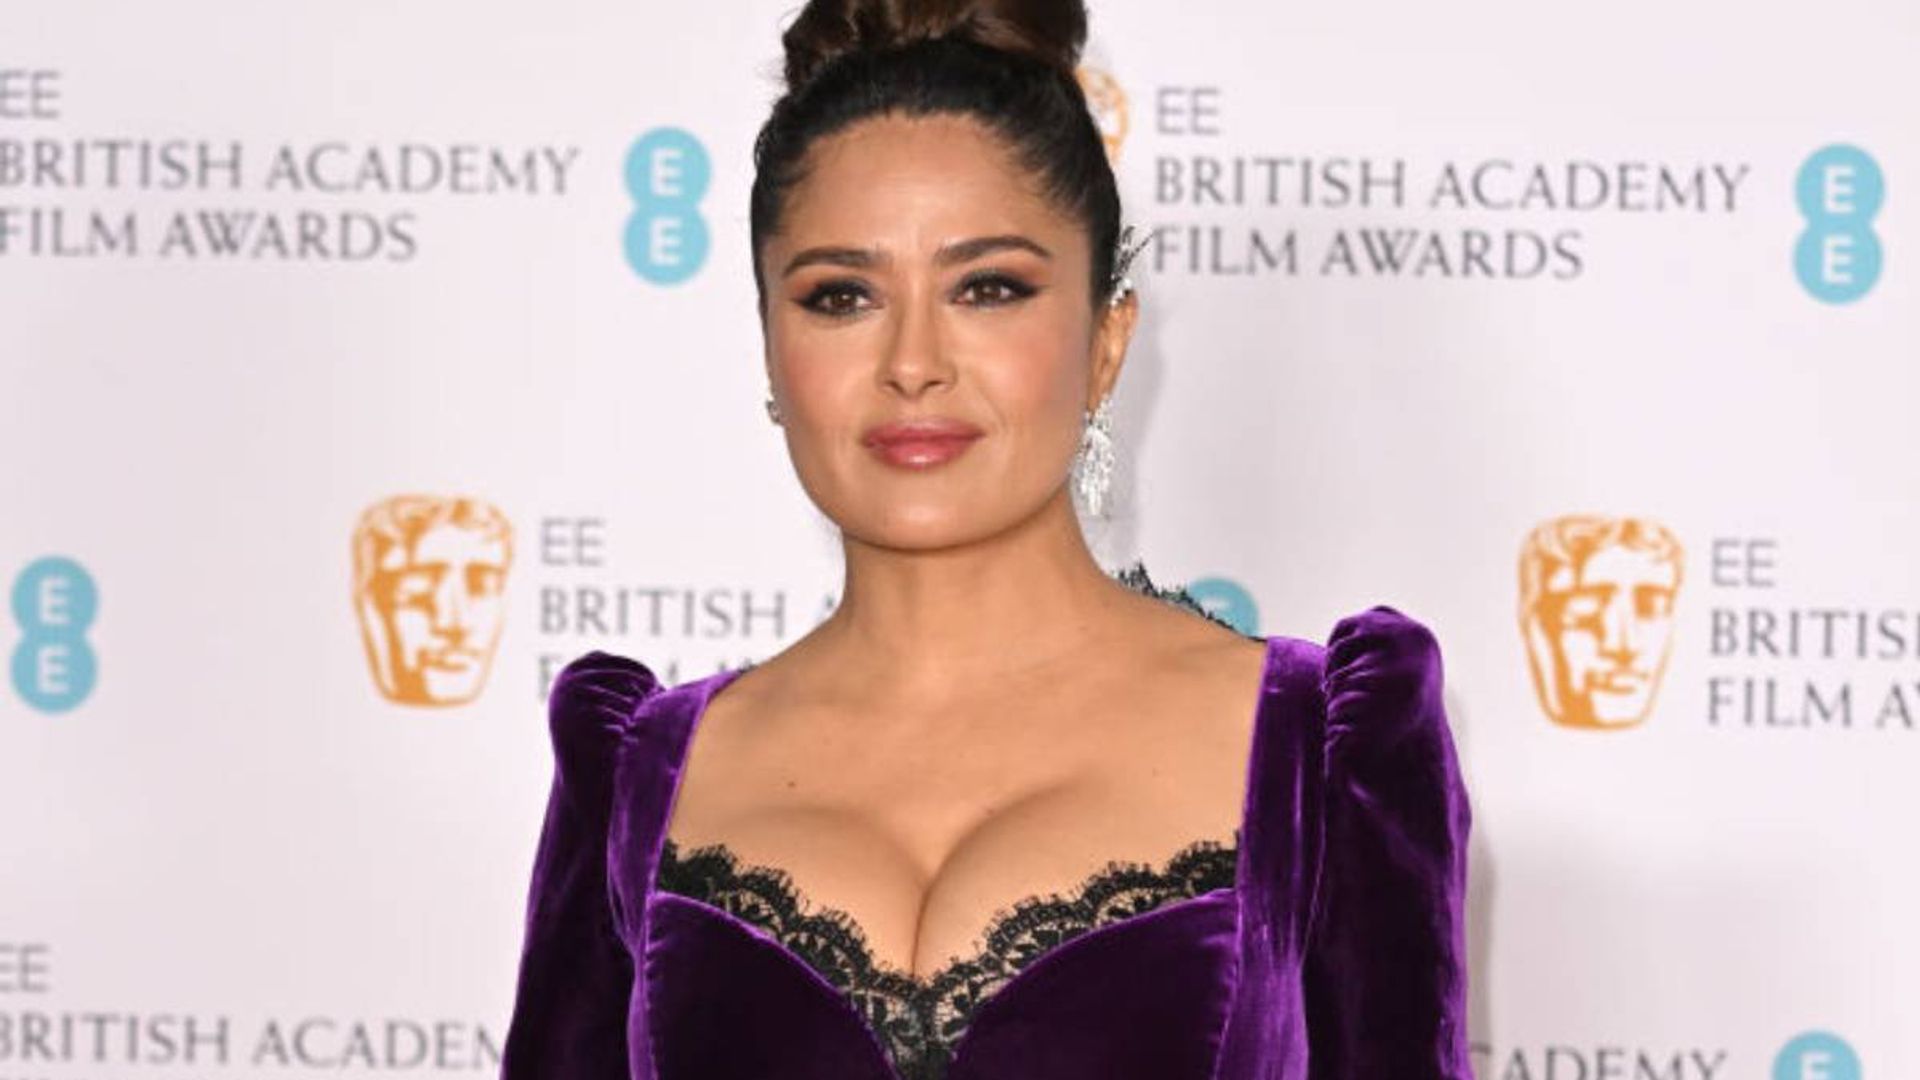 Salma Hayek's racy career move revealed - all the details